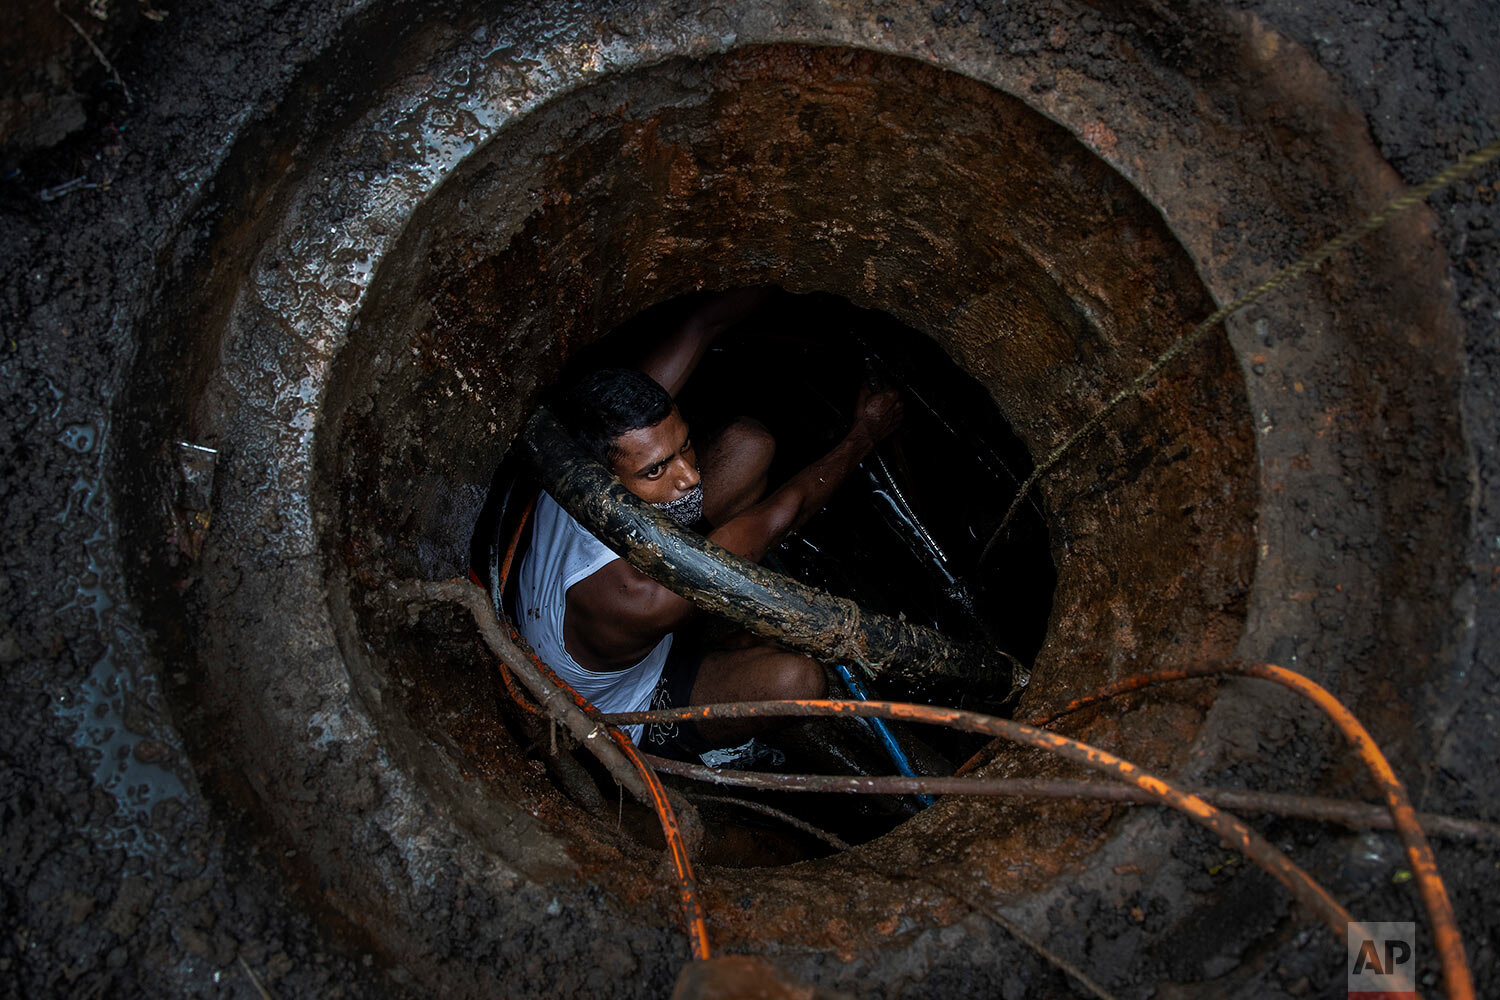  A telephone department worker repairs underground cables during a partial relaxation of restrictions to curb the spread of coronavirus in Gauhati, India, Wednesday, June 9, 2021. (AP Photo/Anupam Nath) 